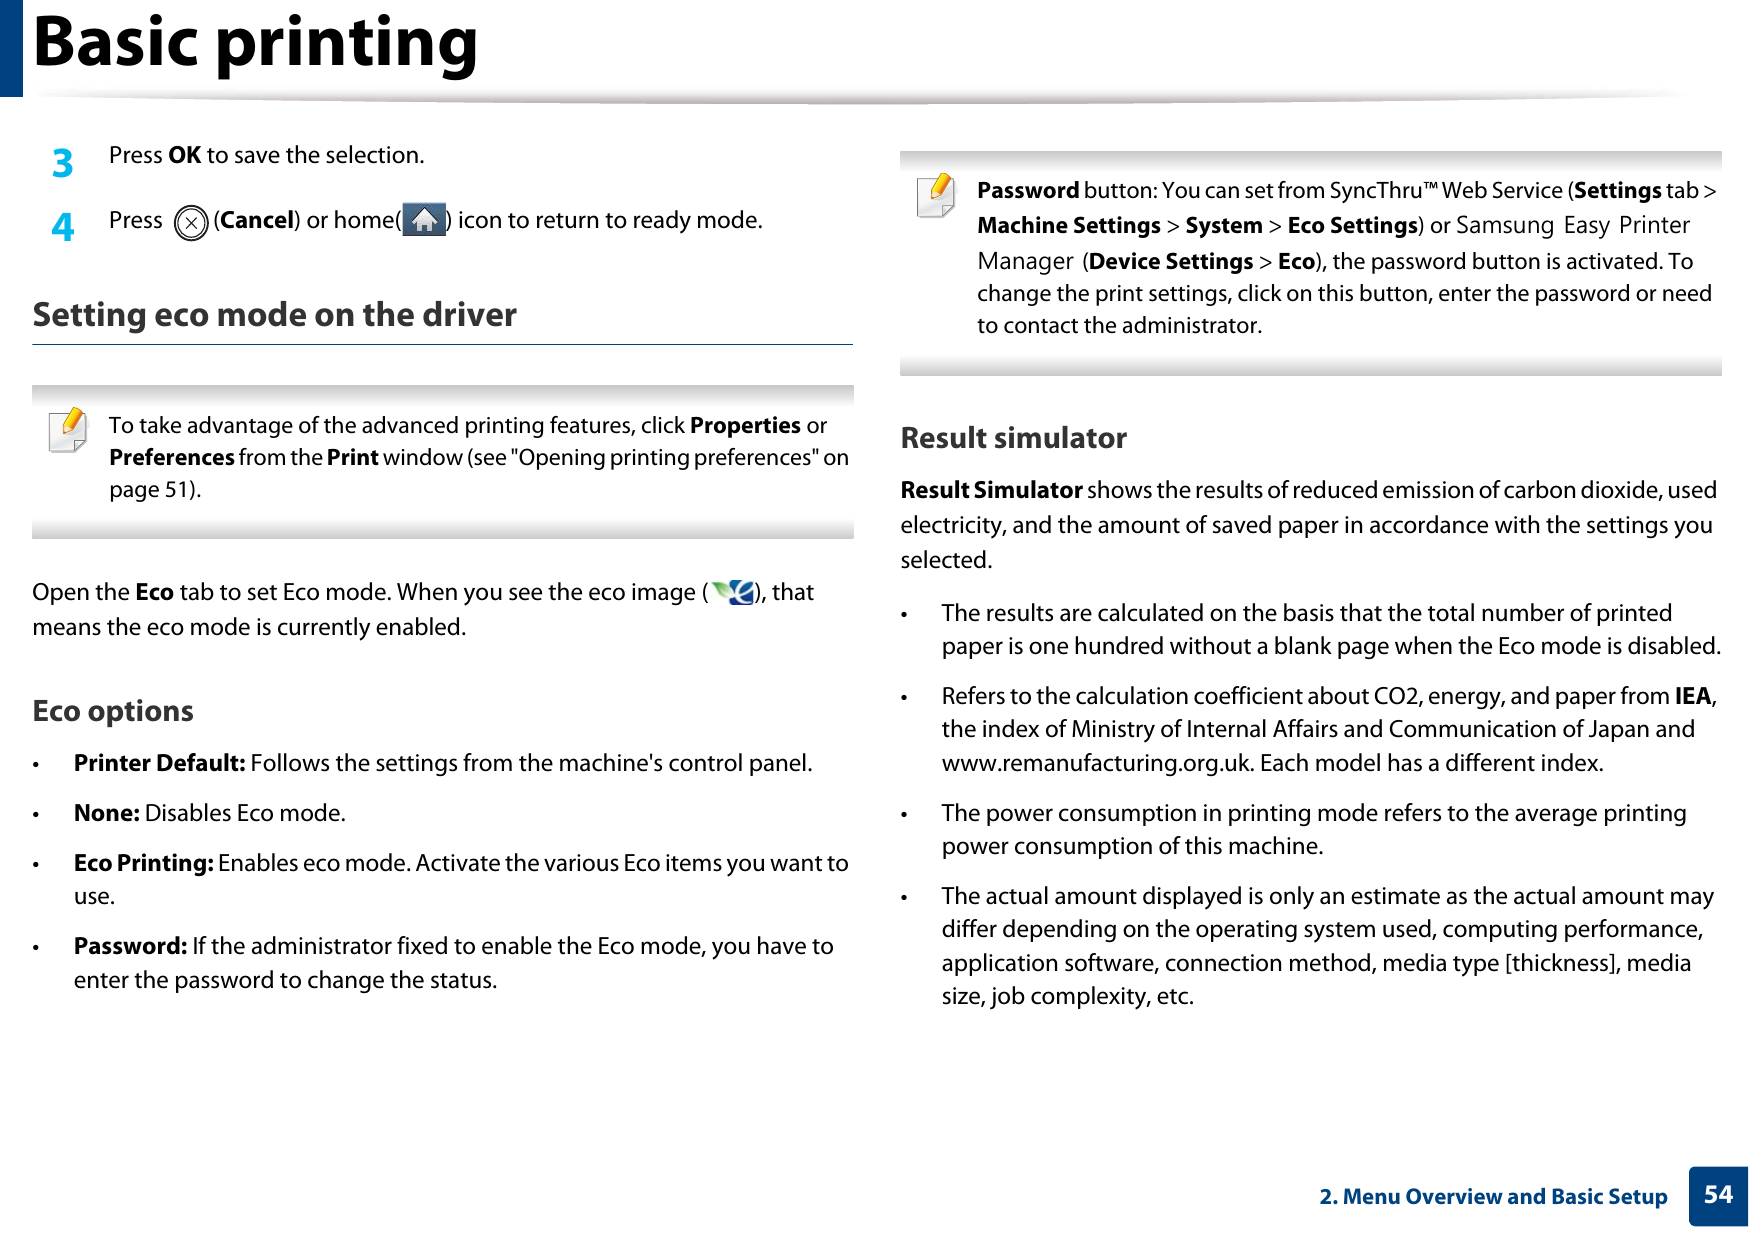 Basic printing542. Menu Overview and Basic Setup3  Press OK to save the selection.4  Press (Cancel) or home( ) icon to return to ready mode.Setting eco mode on the driver To take advantage of the advanced printing features, click Properties or Preferences from the Print window (see &quot;Opening printing preferences&quot; on page 51). Open the Eco tab to set Eco mode. When you see the eco image ( ), that means the eco mode is currently enabled.Eco options•Printer Default: Follows the settings from the machine&apos;s control panel.•None: Disables Eco mode.•Eco Printing: Enables eco mode. Activate the various Eco items you want to use.•Password: If the administrator fixed to enable the Eco mode, you have to enter the password to change the status. Password button: You can set from SyncThru™ Web Service (Settings tab &gt; Machine Settings &gt; System &gt; Eco Settings) or Samsung Easy Printer Manager (Device Settings &gt; Eco), the password button is activated. To change the print settings, click on this button, enter the password or need to contact the administrator. Result simulatorResult Simulator shows the results of reduced emission of carbon dioxide, used electricity, and the amount of saved paper in accordance with the settings you selected.• The results are calculated on the basis that the total number of printed paper is one hundred without a blank page when the Eco mode is disabled.• Refers to the calculation coefficient about CO2, energy, and paper from IEA, the index of Ministry of Internal Affairs and Communication of Japan and www.remanufacturing.org.uk. Each model has a different index. • The power consumption in printing mode refers to the average printing power consumption of this machine. • The actual amount displayed is only an estimate as the actual amount may differ depending on the operating system used, computing performance, application software, connection method, media type [thickness], media size, job complexity, etc.